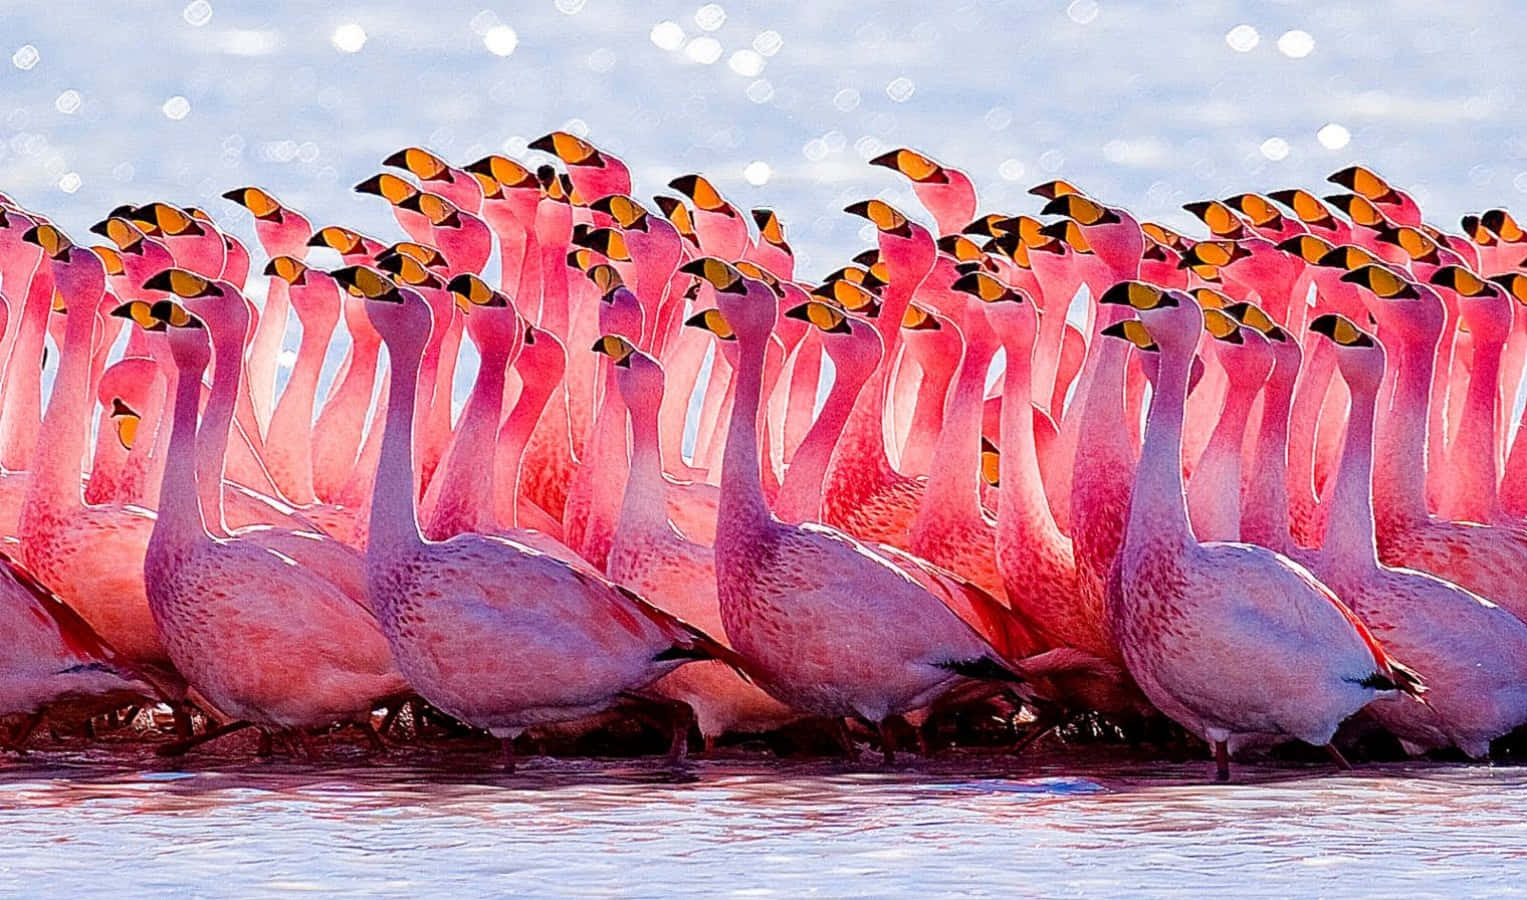 A group of beautiful Pink Flamingos basking under the sun in nature Wallpaper